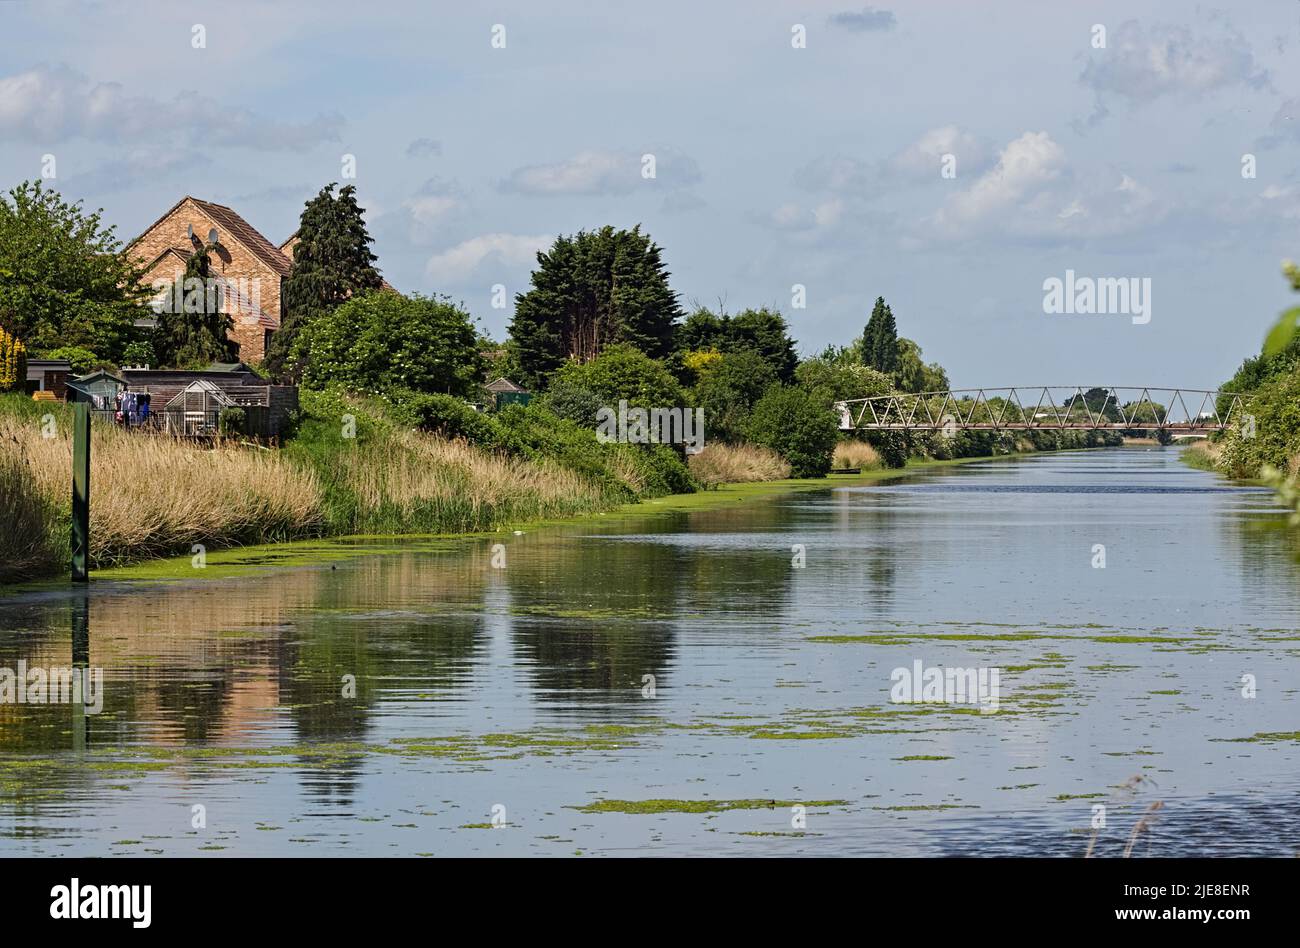 The south forty-foot waterway and riverbank with a water bridge in the distance. Stock Photo